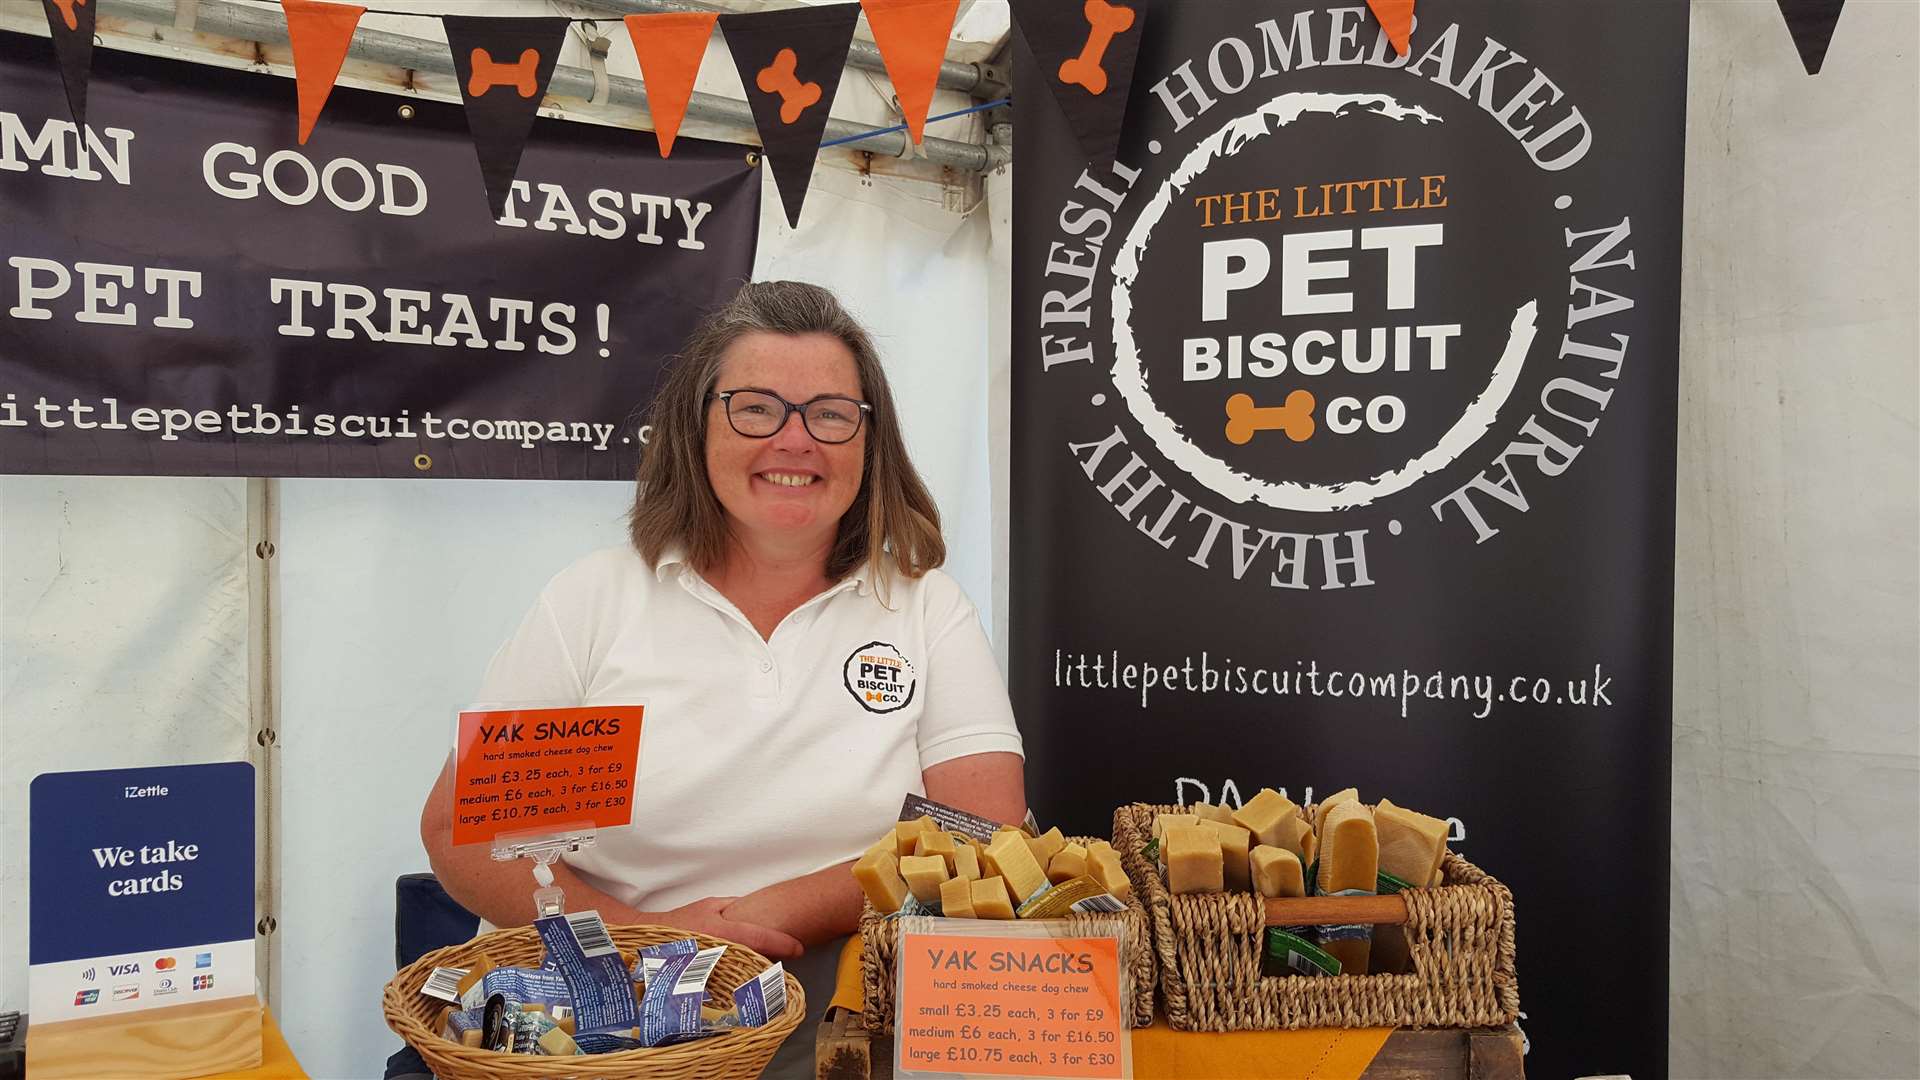 Dominique Pitzzingrilli, owner of The Little Pet Biscuit Company (2920355)